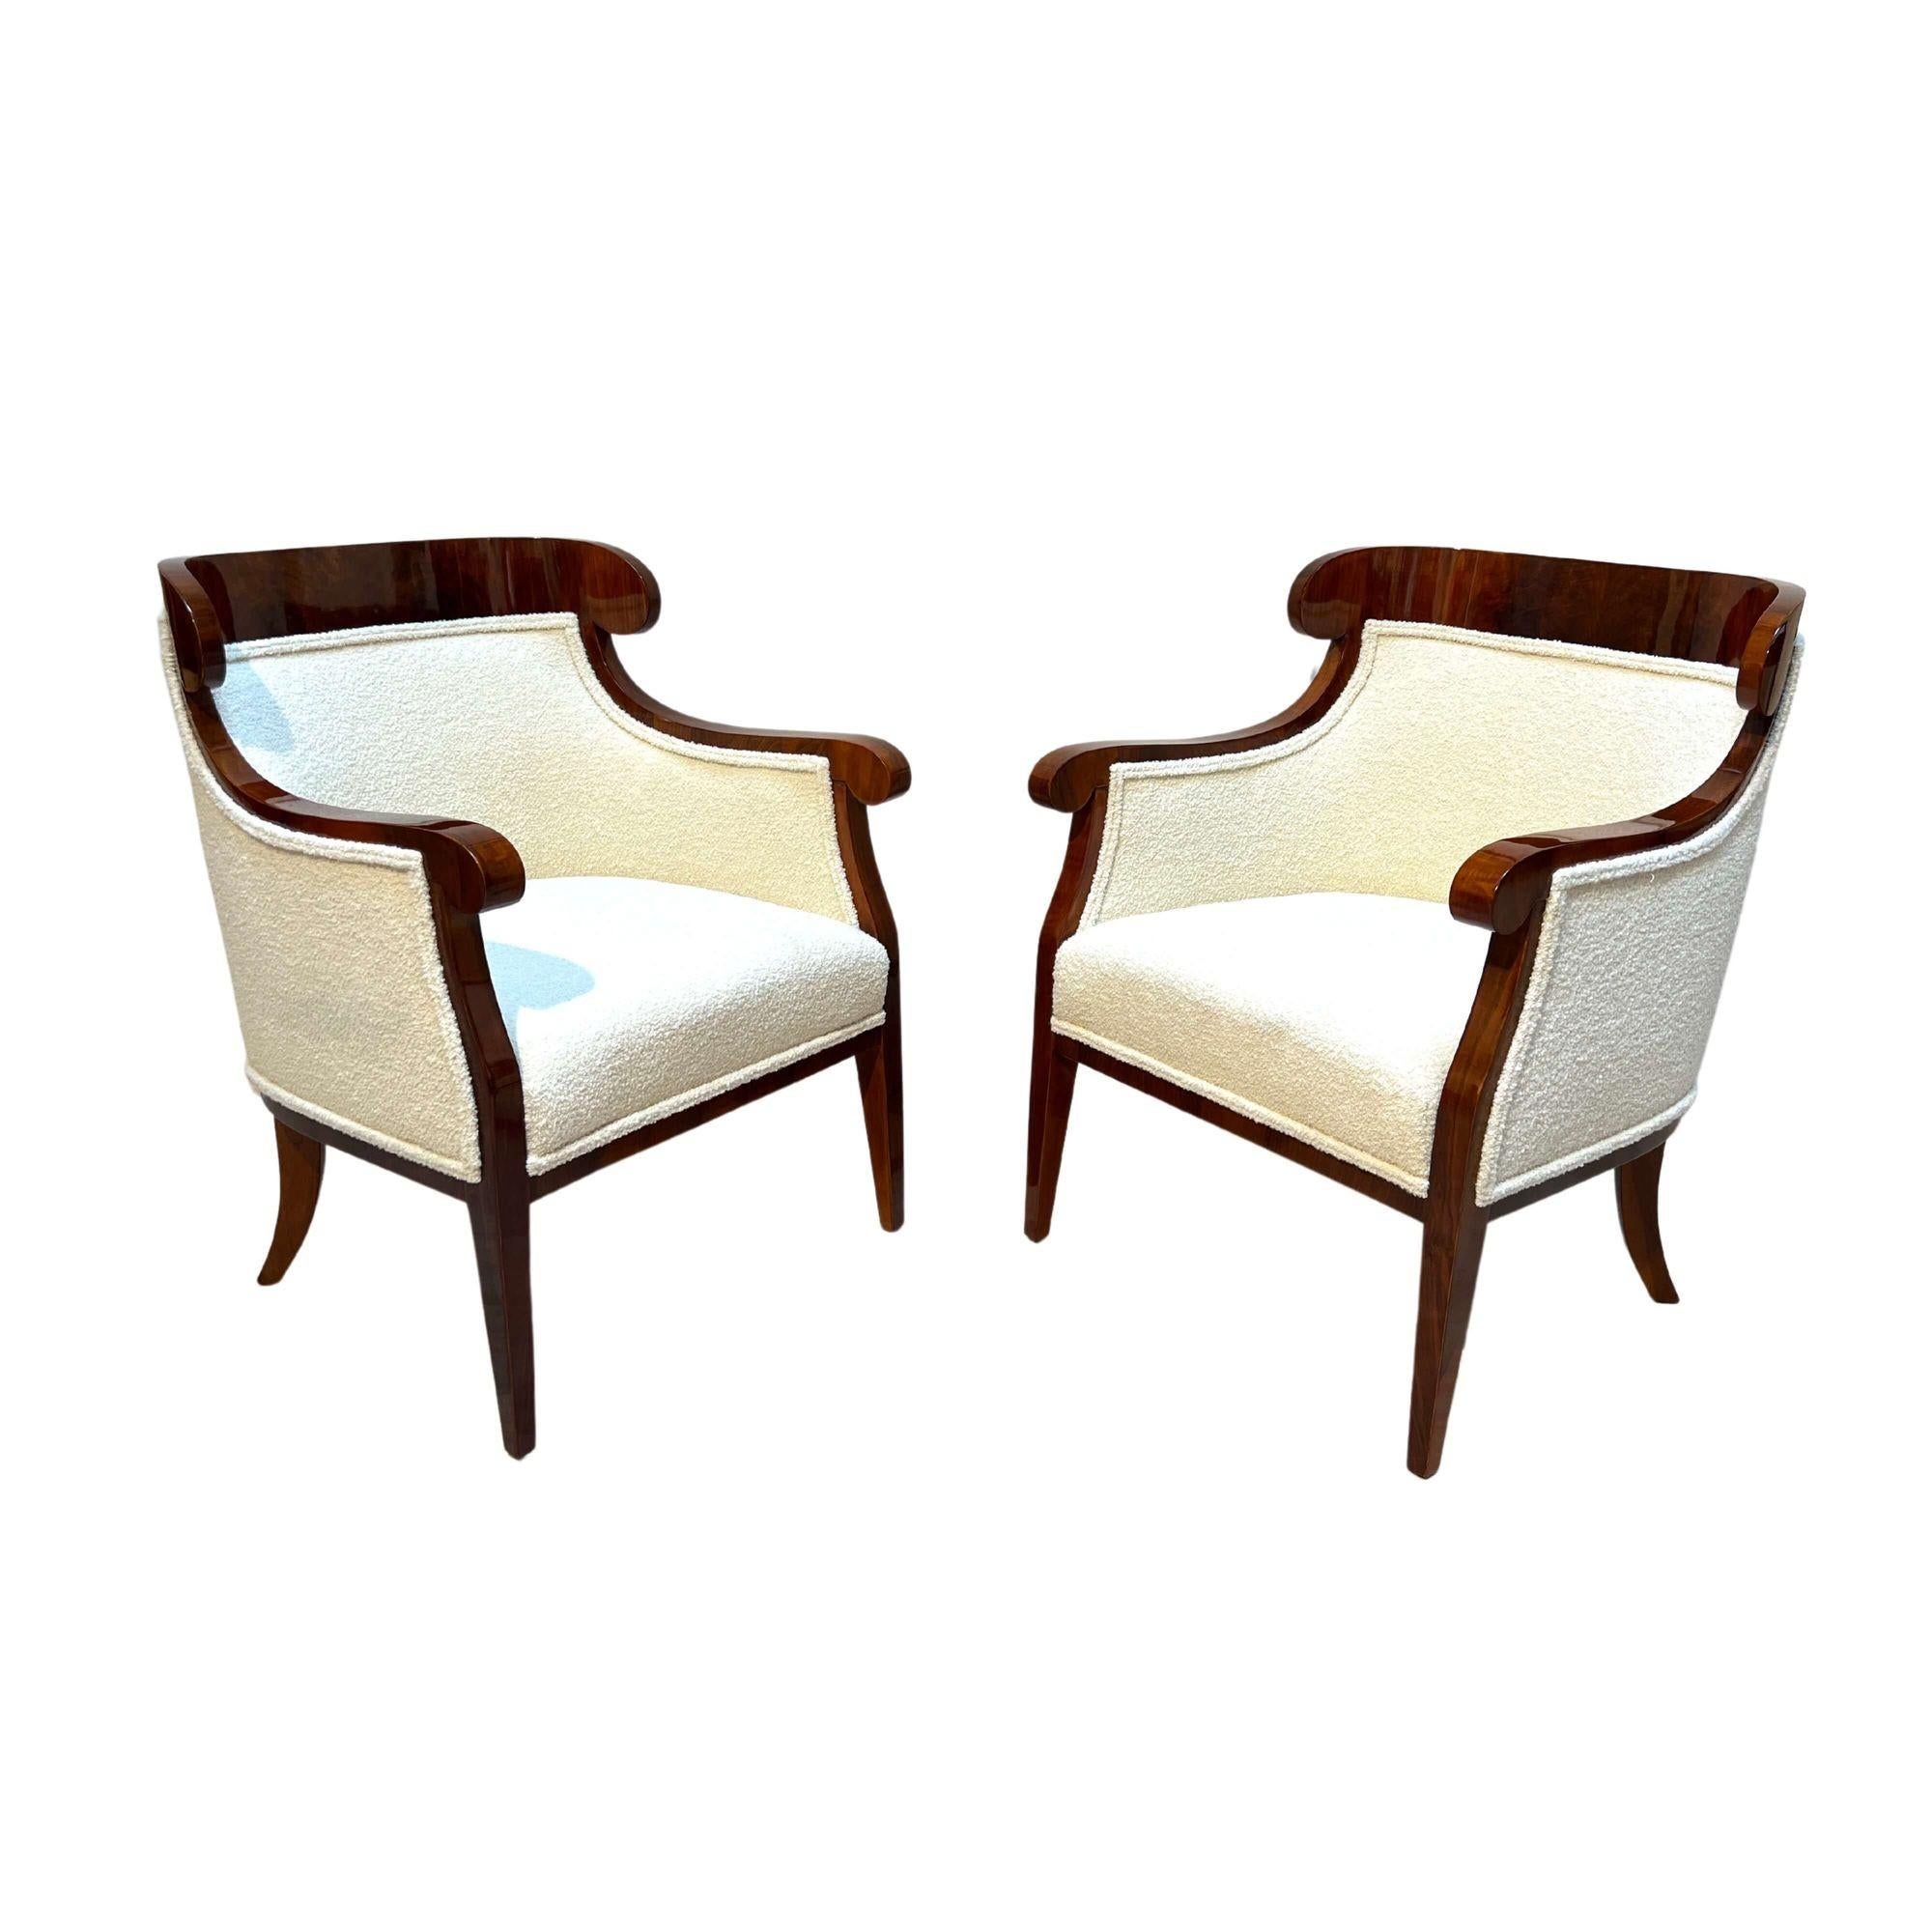 Beautiful pair of Biedermeier Bergeres or Bergere chairs from Austria around 1860.
Walnut veneered and solid wood. Restored and hand polished with shellac. Conical square tapered legs. Newly upholstered with cream-white boucle fabric.
Dimensions: